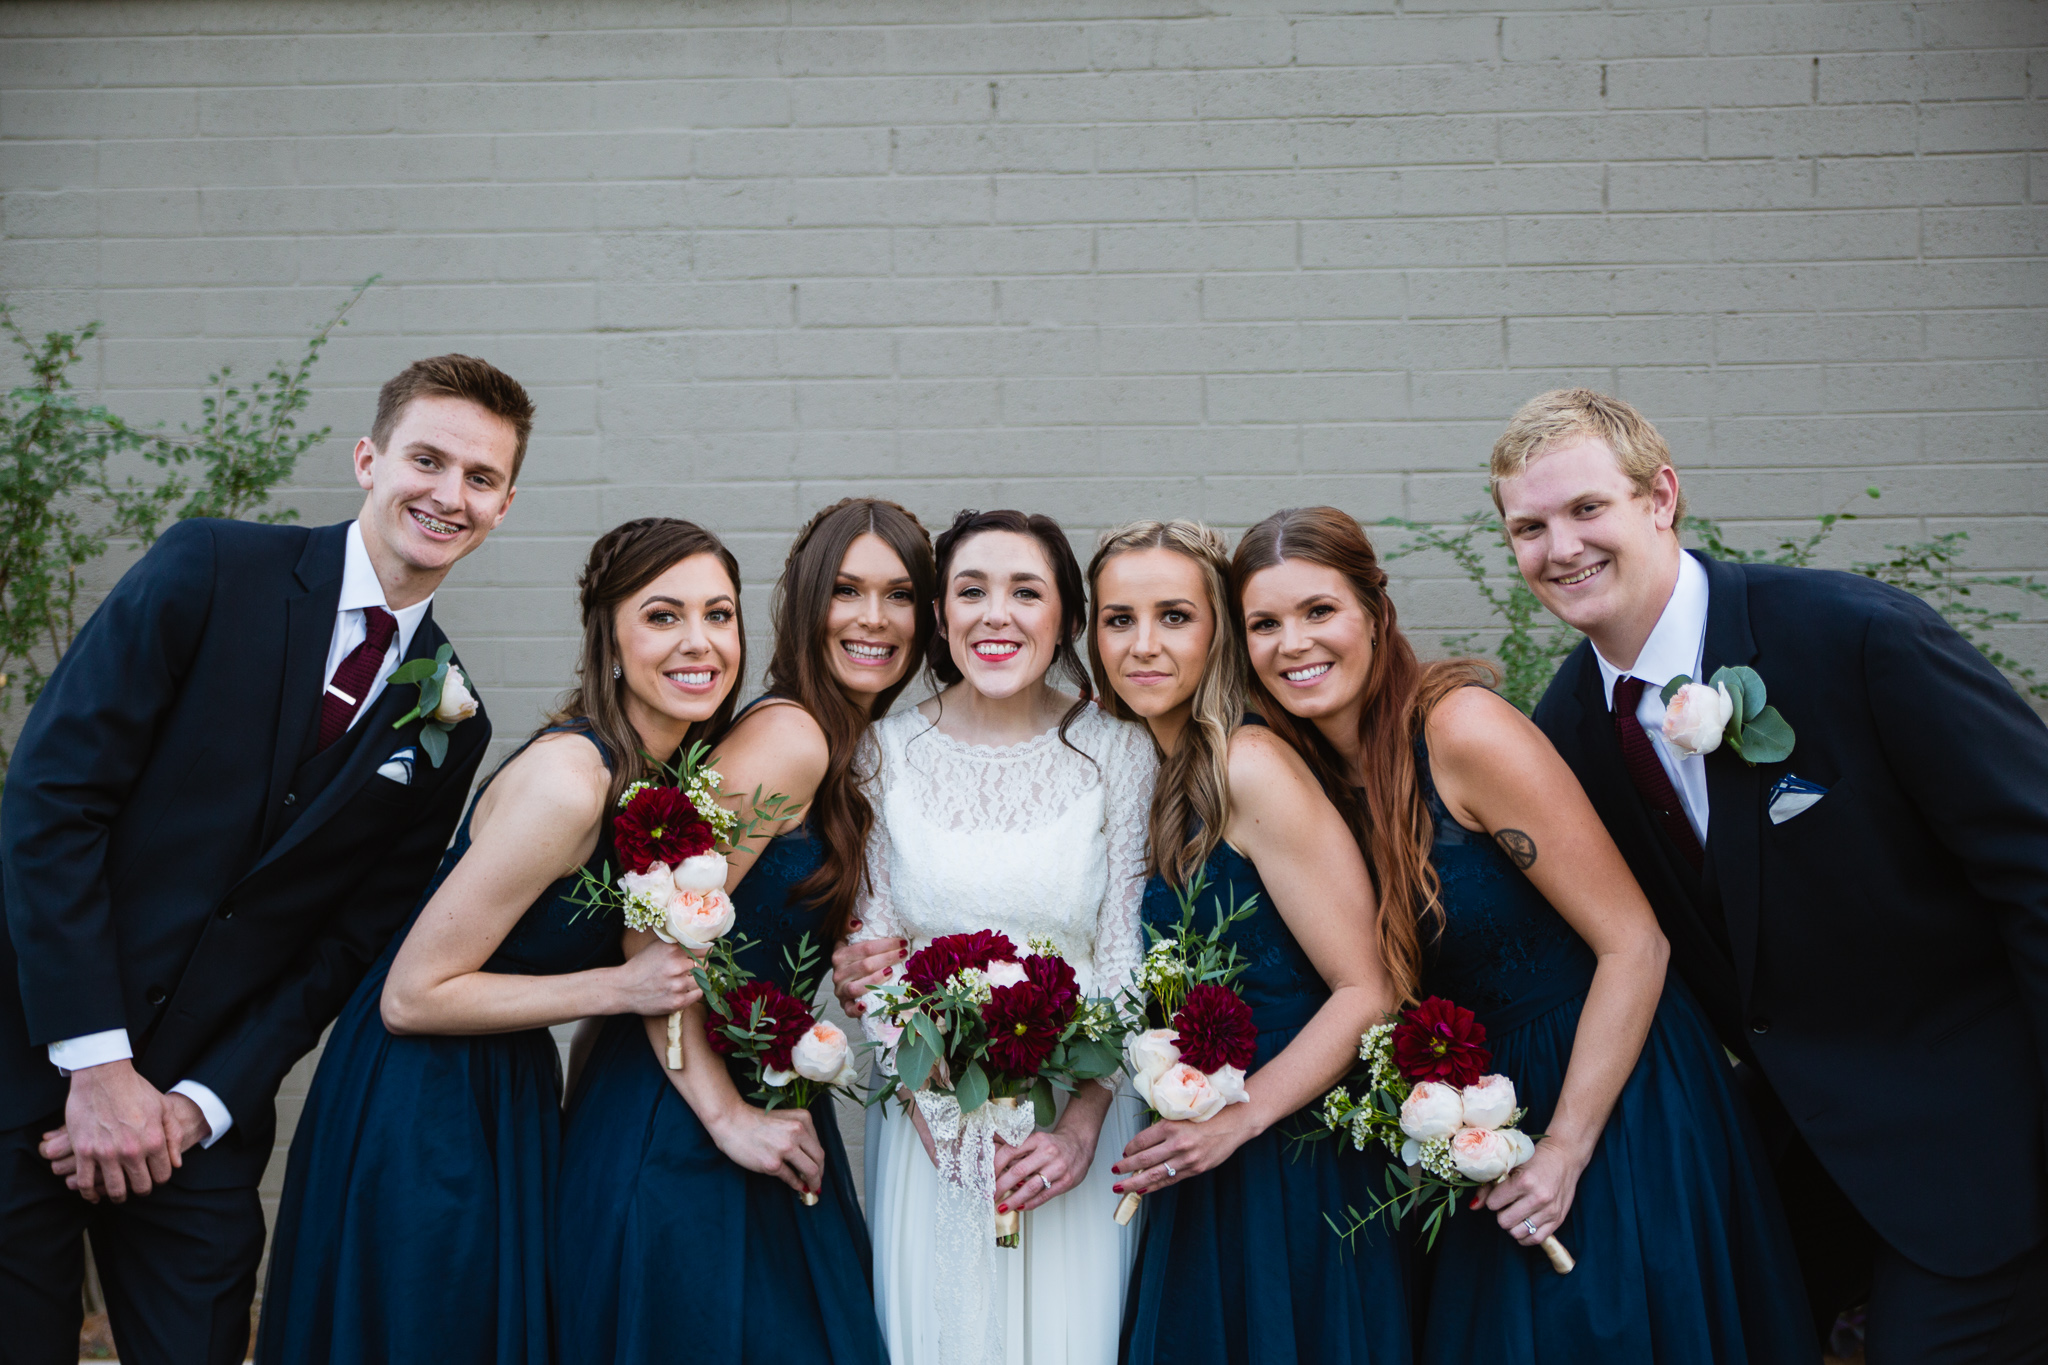 Vintage themed maroon and navy bridal party. Bride with her mixed gender bridal party.